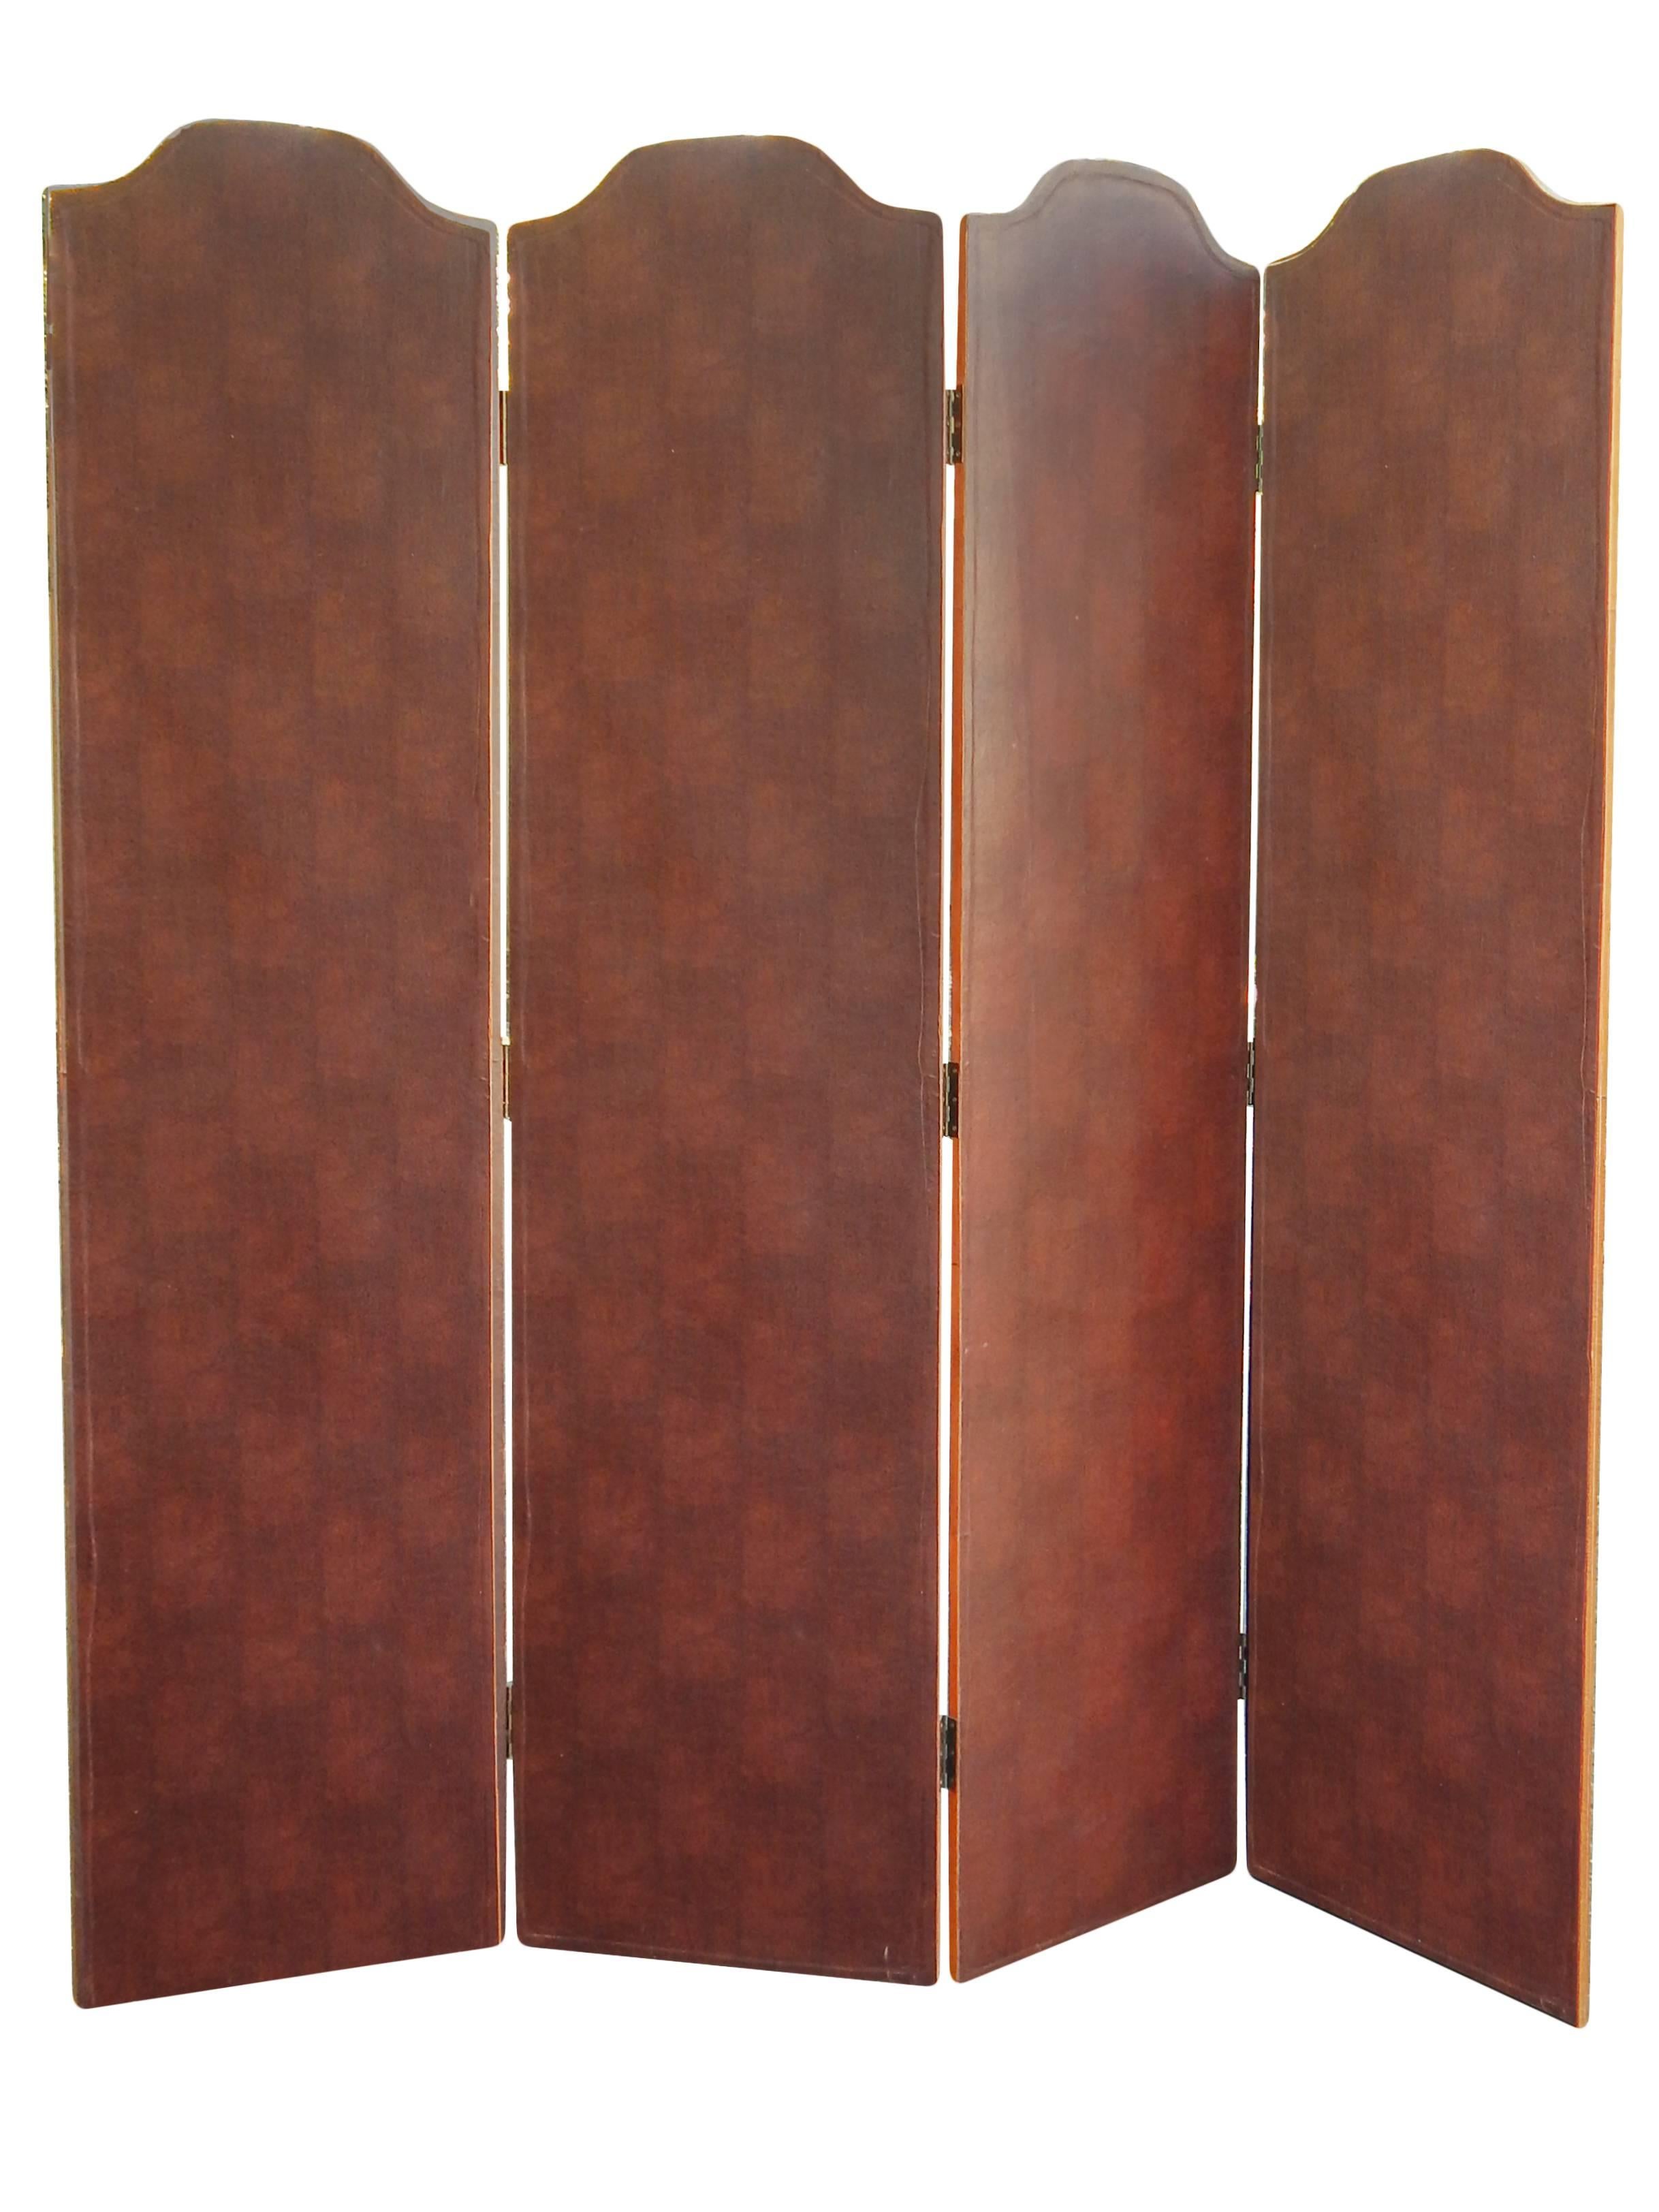 Pigskin Leather Screen In Good Condition For Sale In Bridgehampton, NY